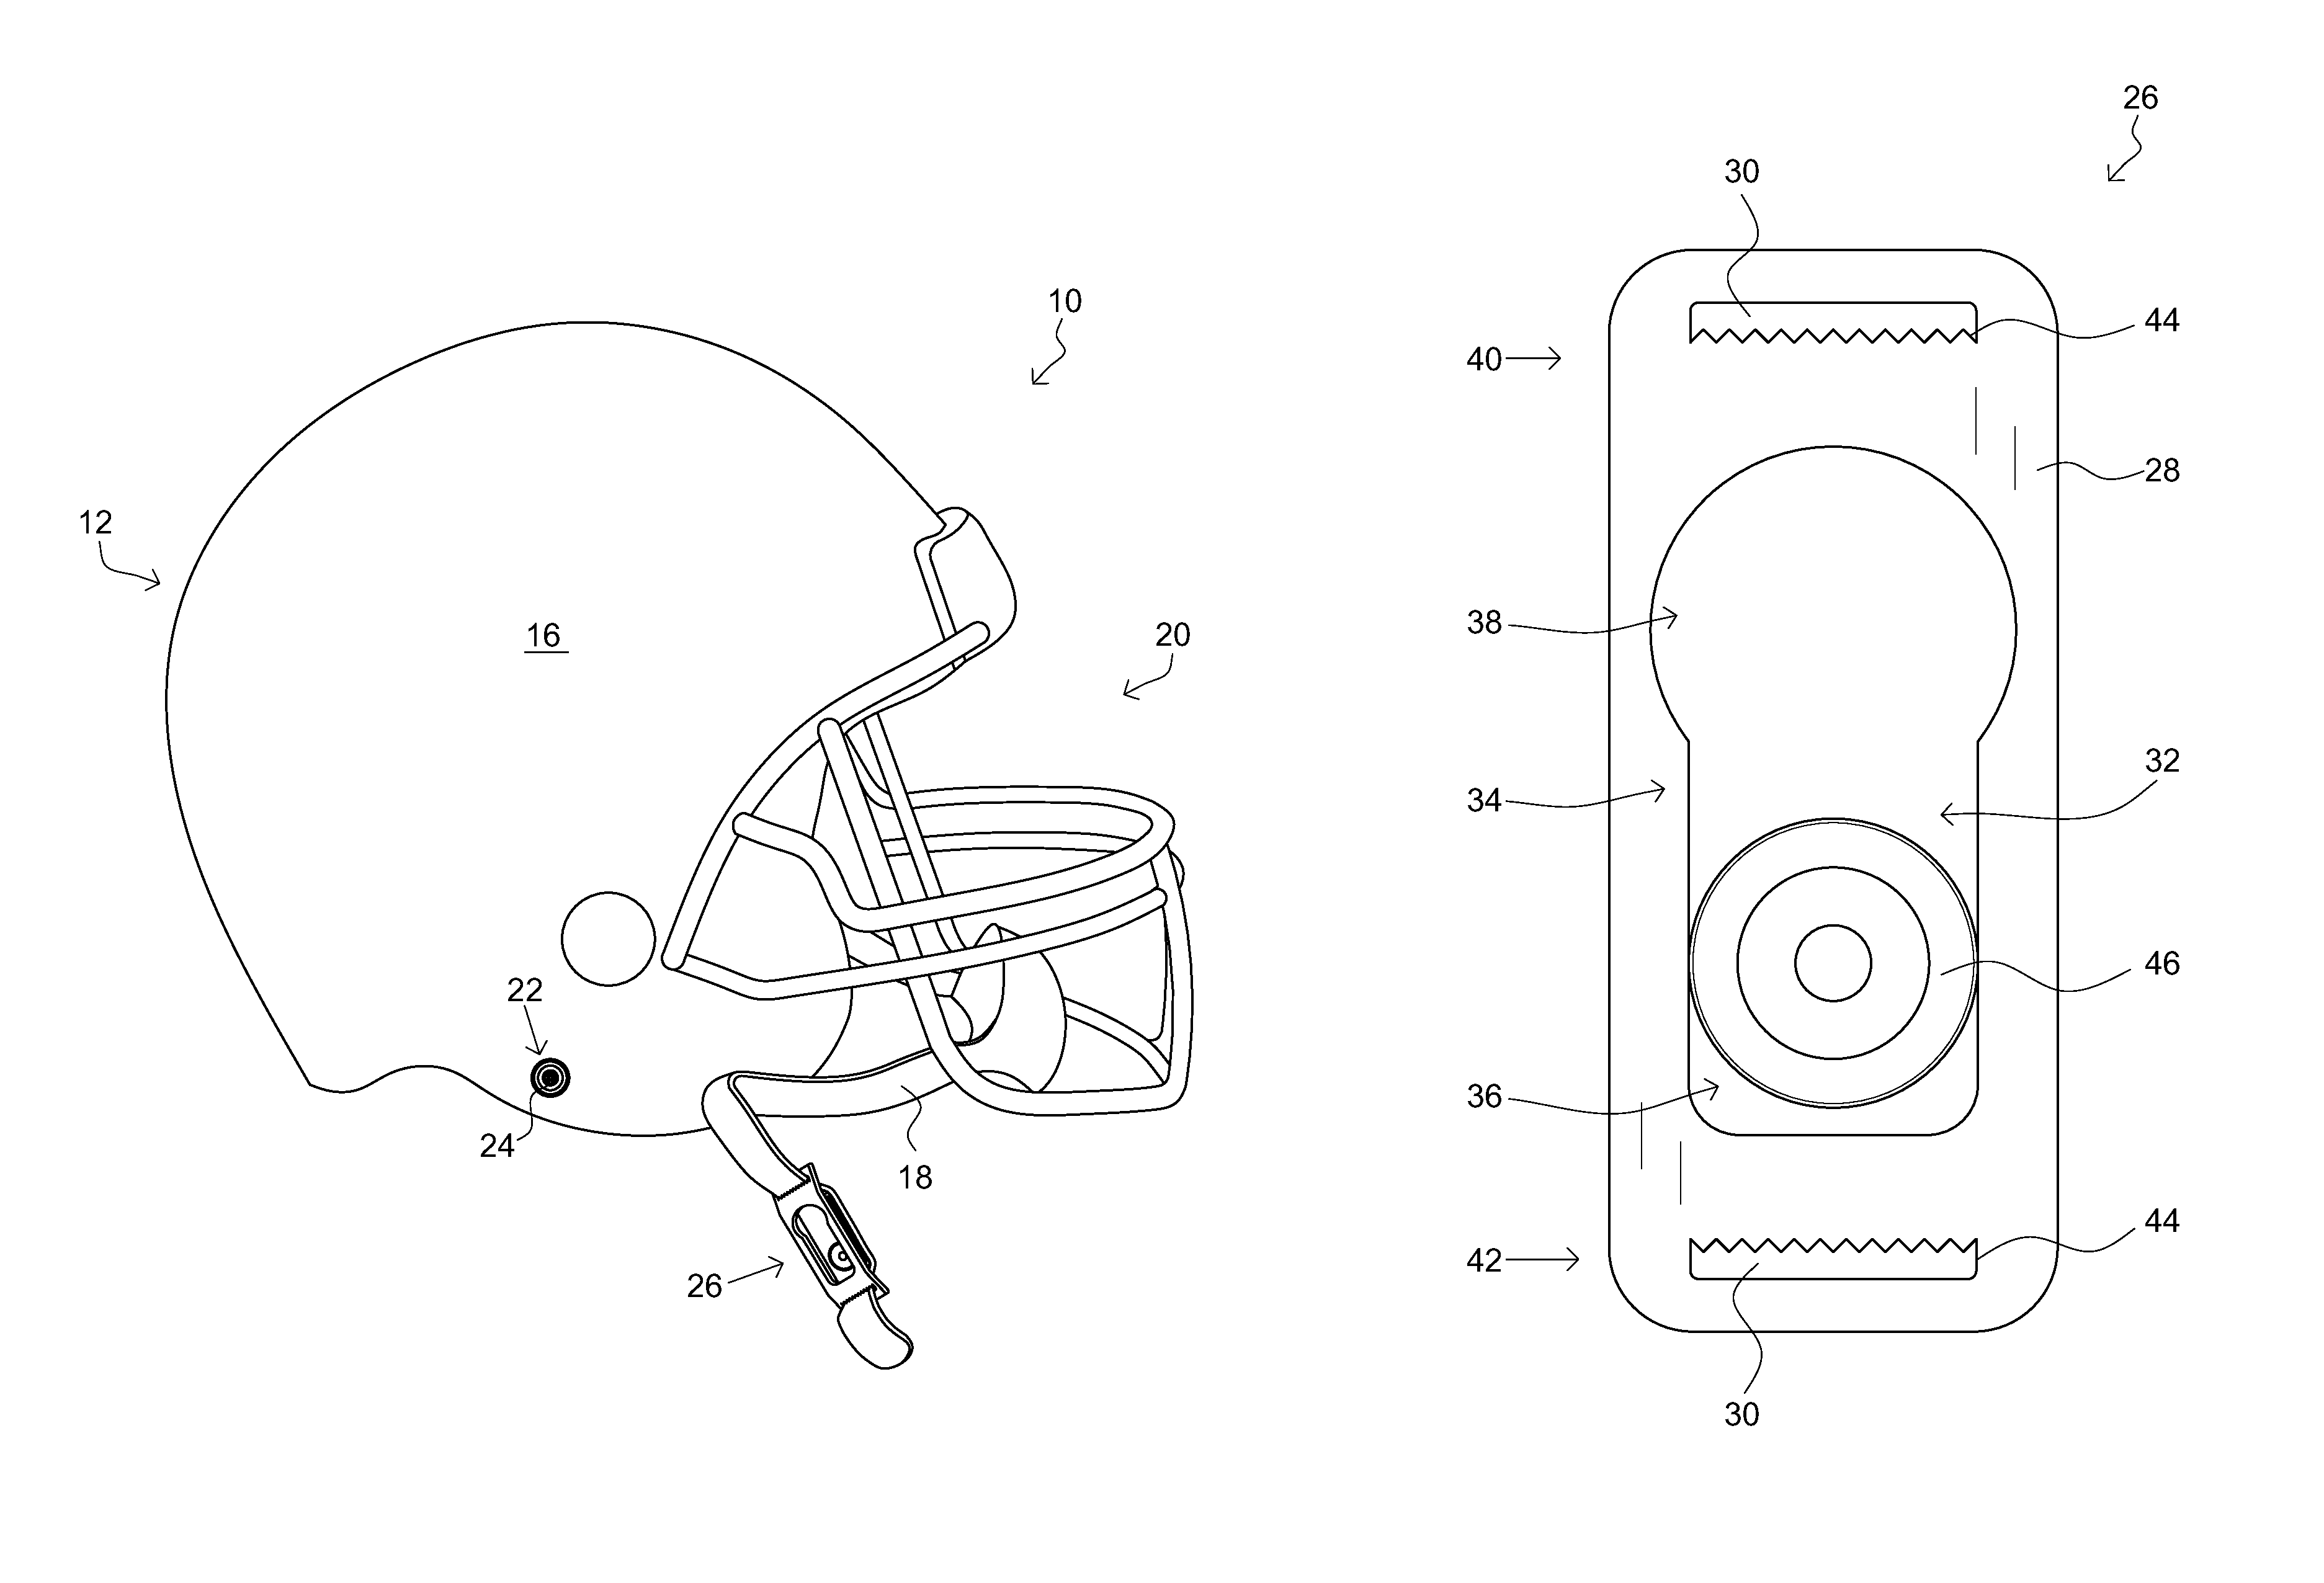 Helmet with a chin strap buckle system